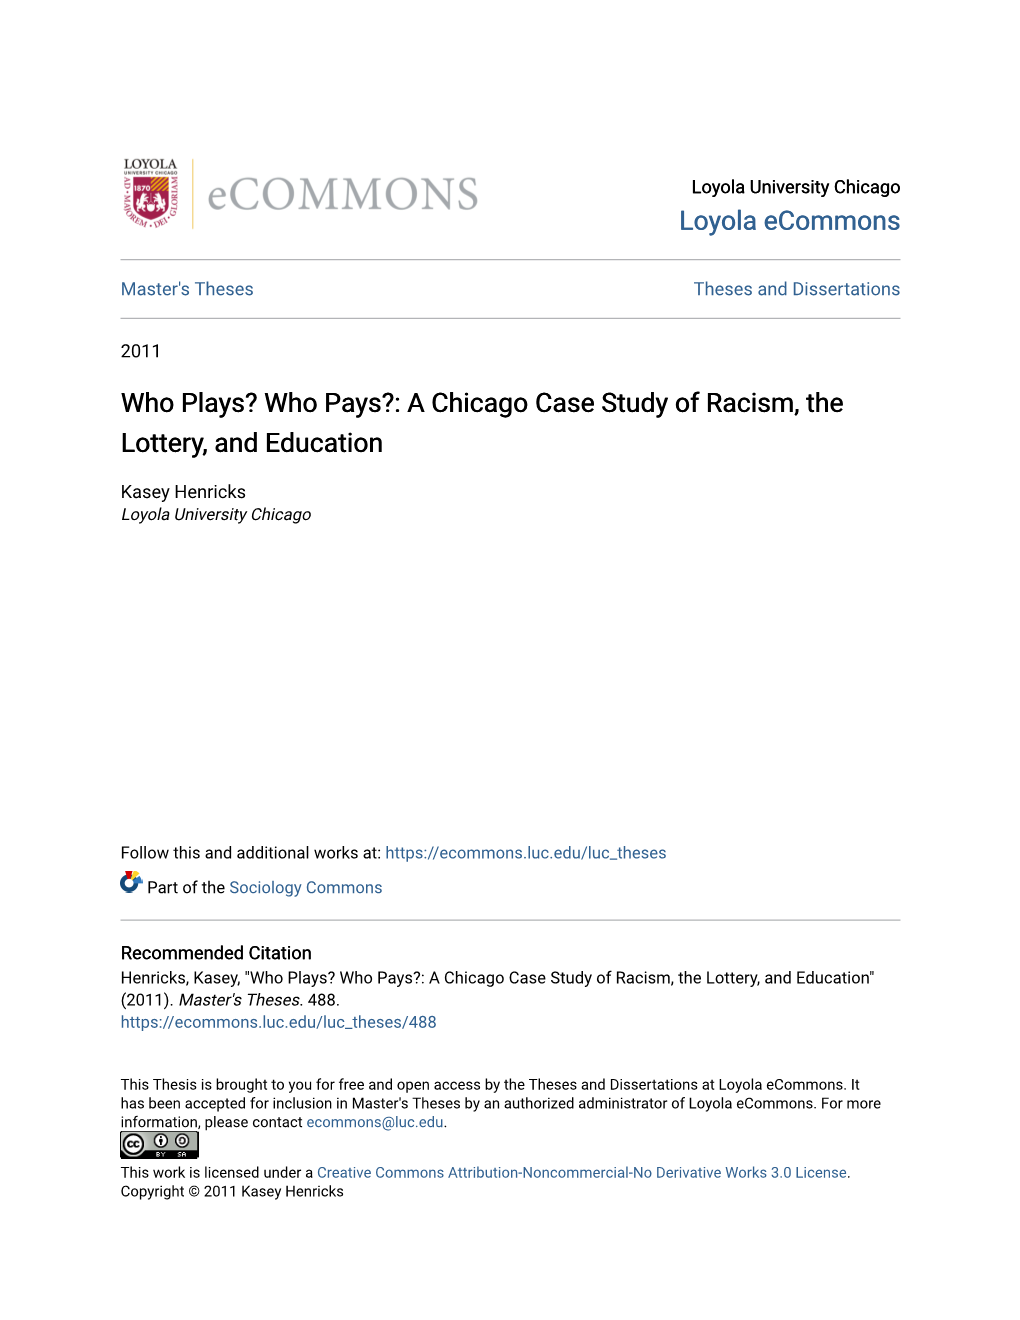 Who Pays?: a Chicago Case Study of Racism, the Lottery, and Education